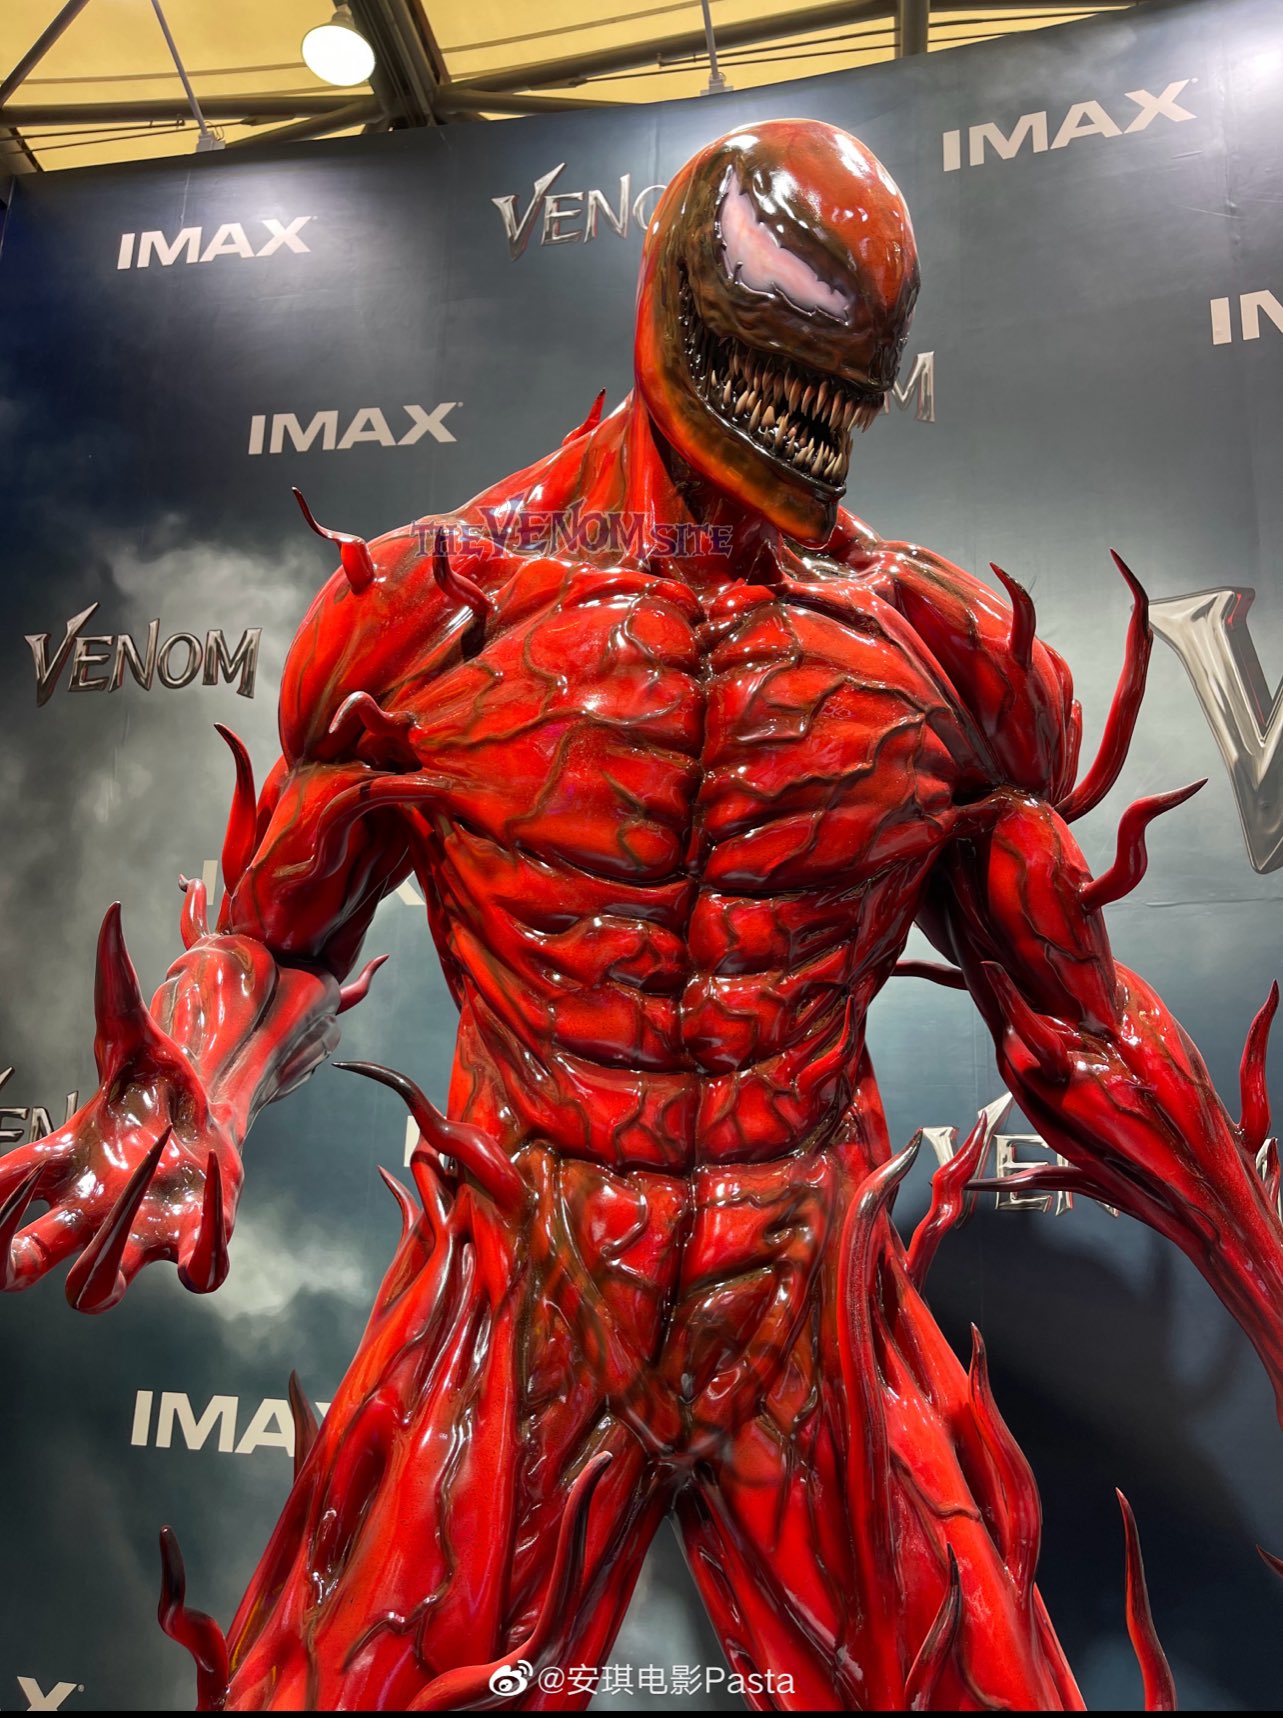 Venom: Let There Be Carnage Chinese IMAX Stand-Ups Give Best Look Yet